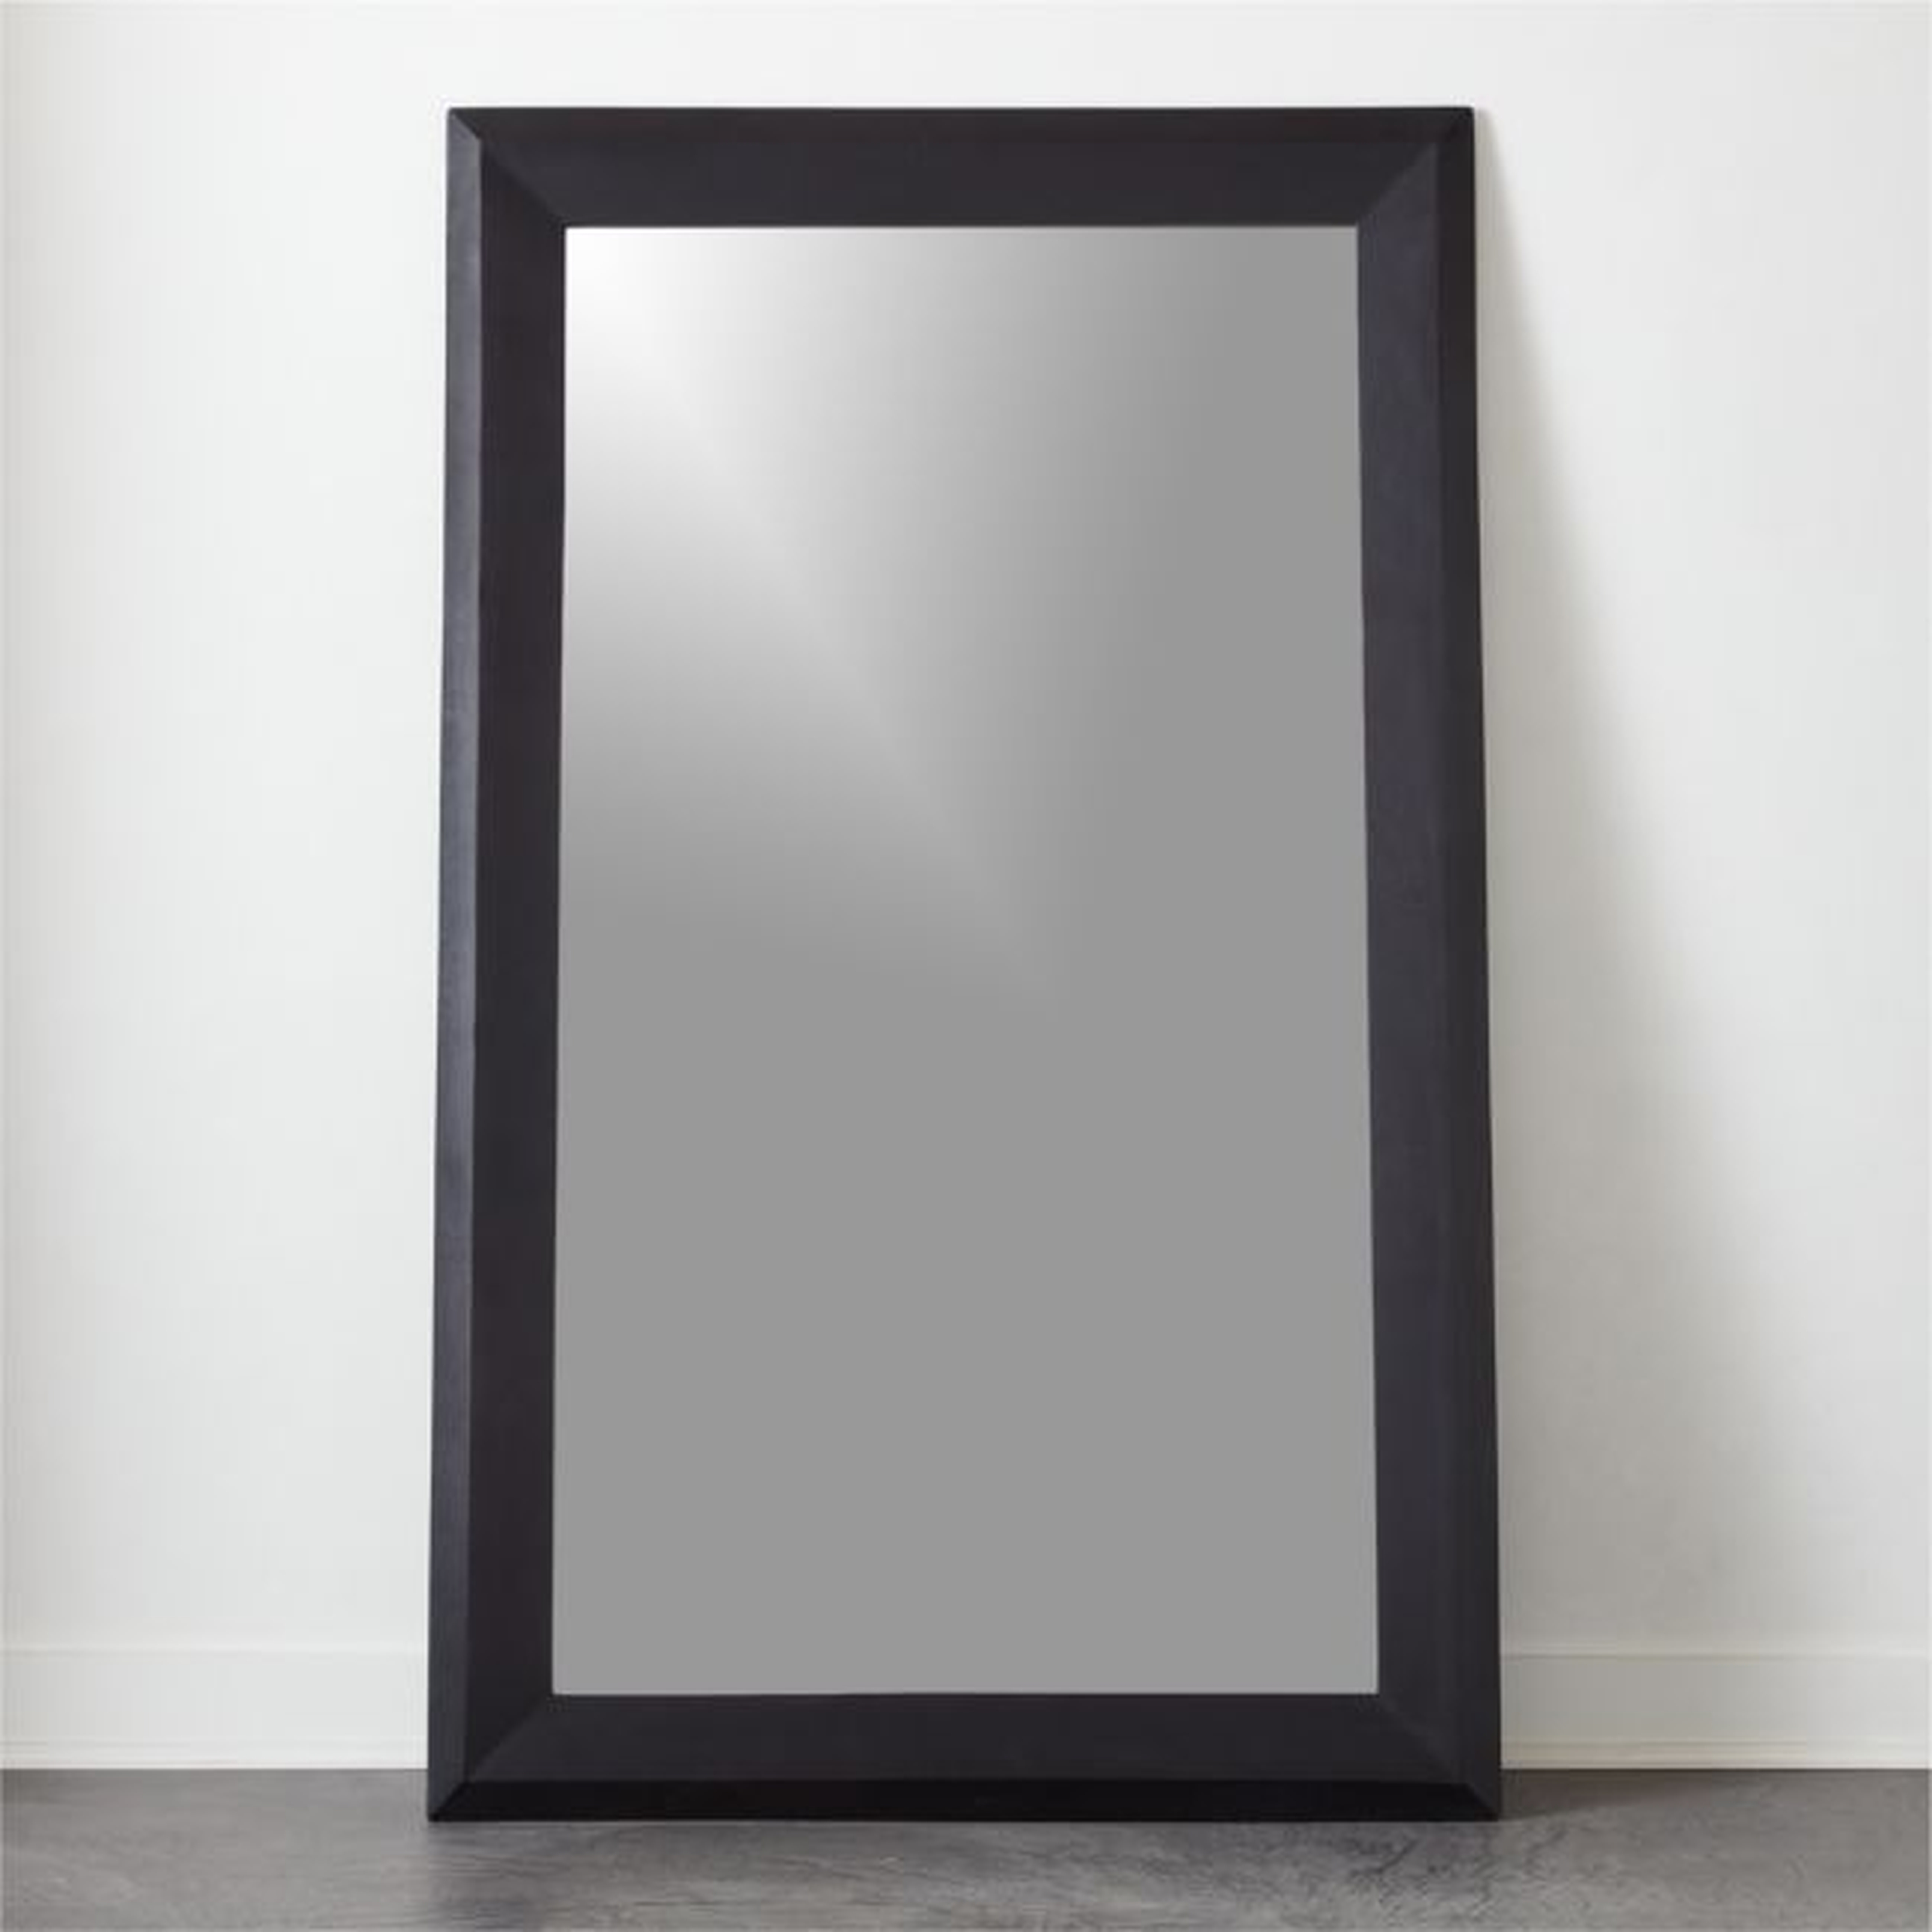 Good From All Angles Black Floor Mirror 48"x78" - CB2